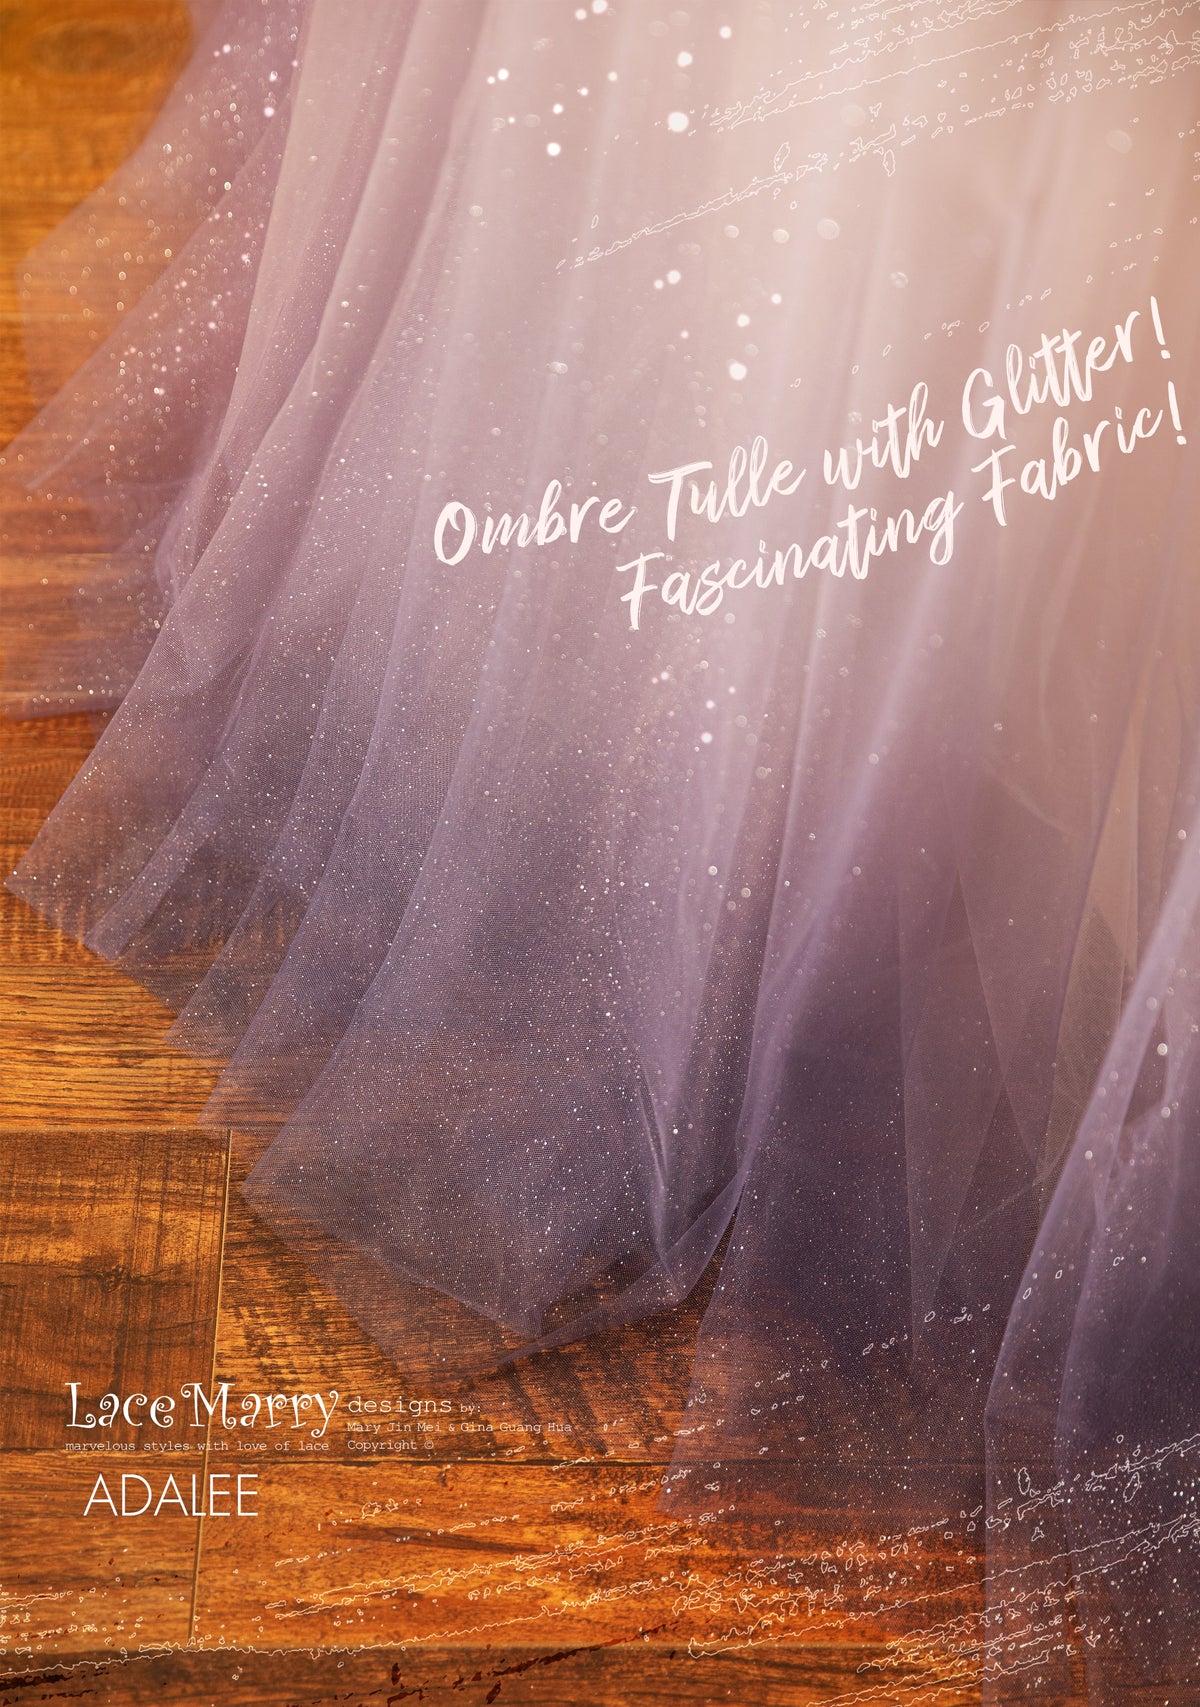 ADALEE / Ombre Glitter Wedding Dress with Purple and Nude Tone